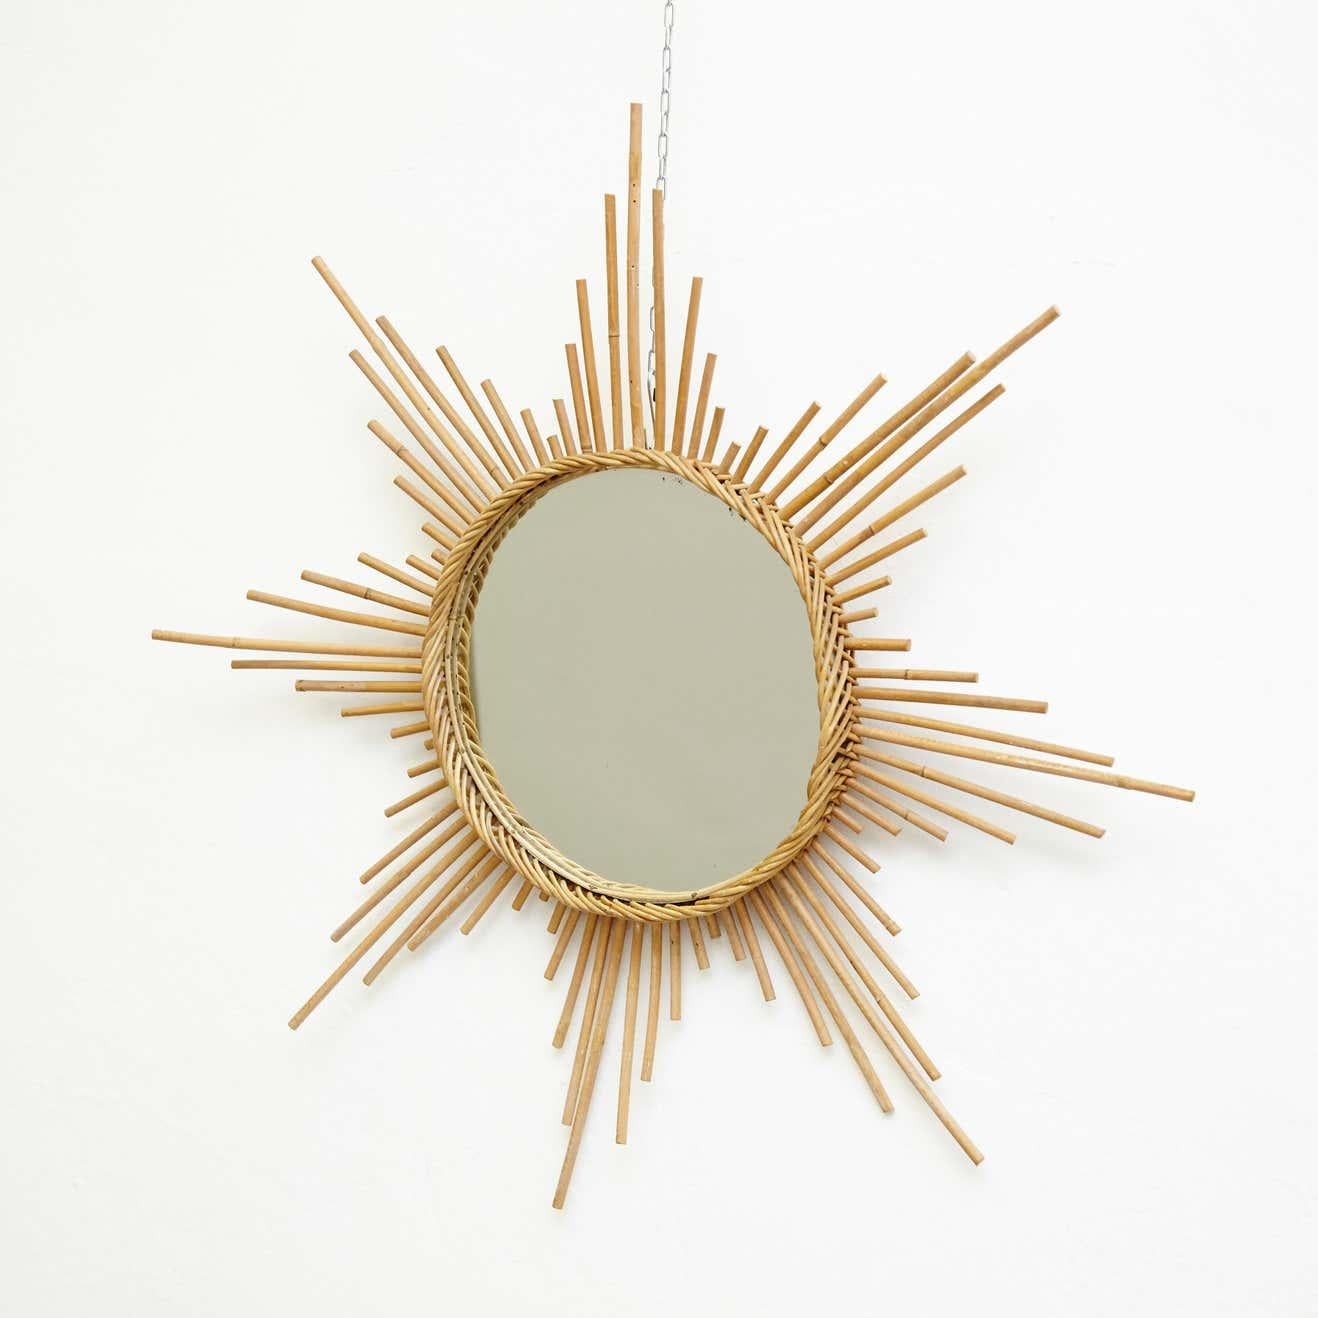 Mid-Century Modern French handcrafted rattan wall mirror.

Infuse your home with the charm of Mid-Century Modern design with this French handcrafted rattan wall mirror, created by an unknown artisan circa 1960. The unique design and intricate